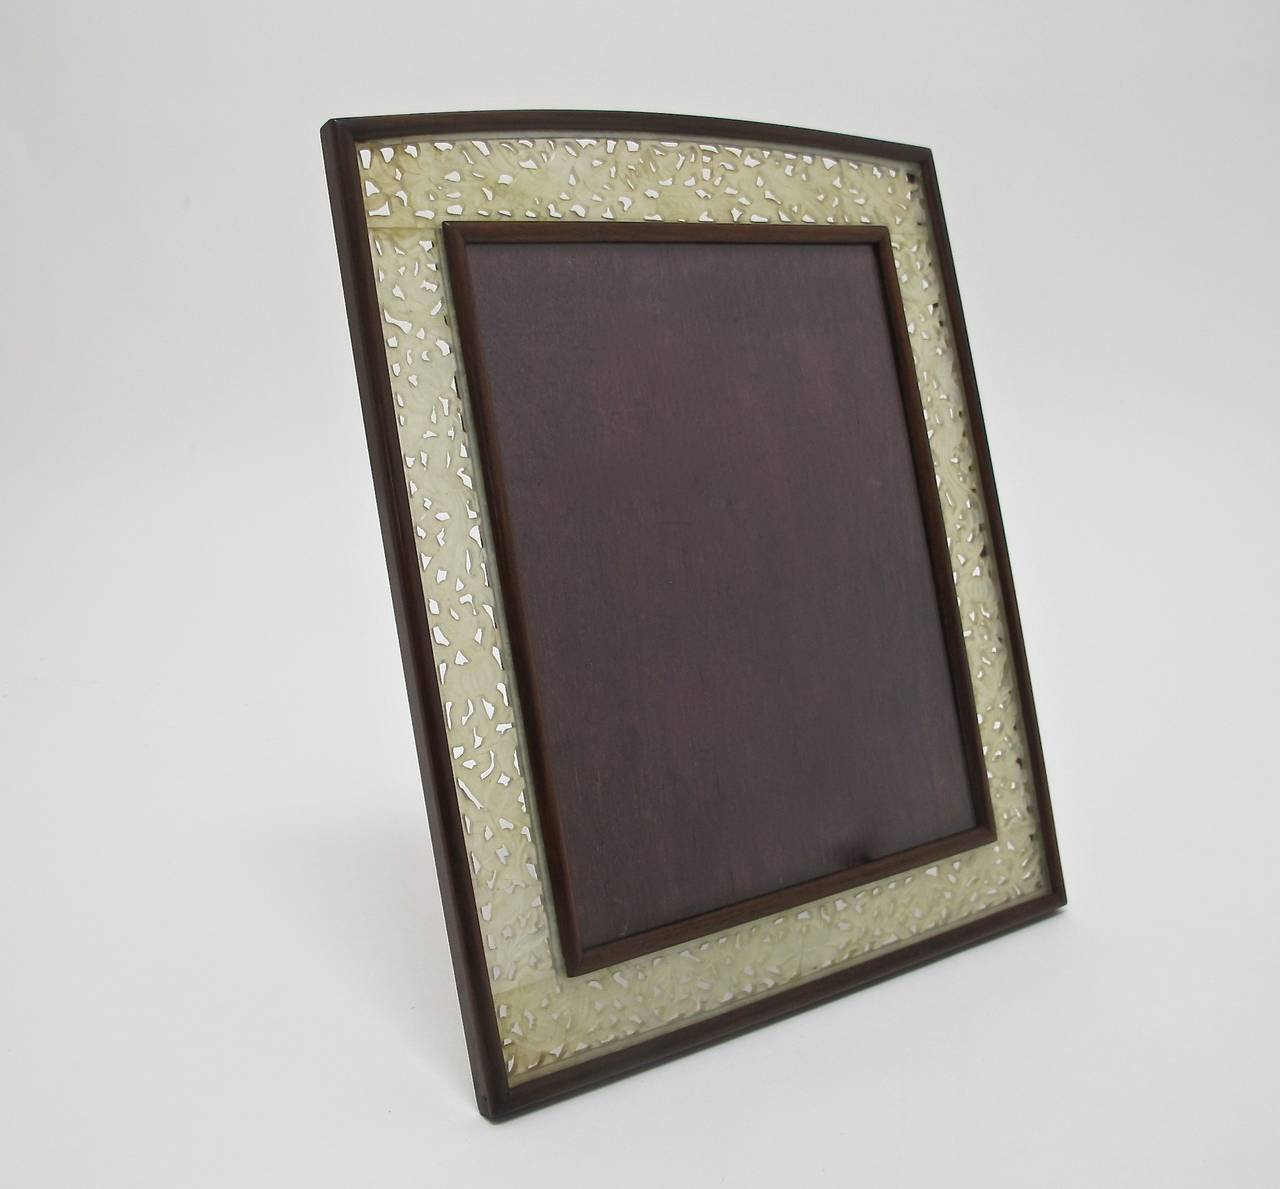 A lovely large antique picture or photo frame with reticulated carved white jade in a scrolling floral pattern. Frame measures 13 3/8